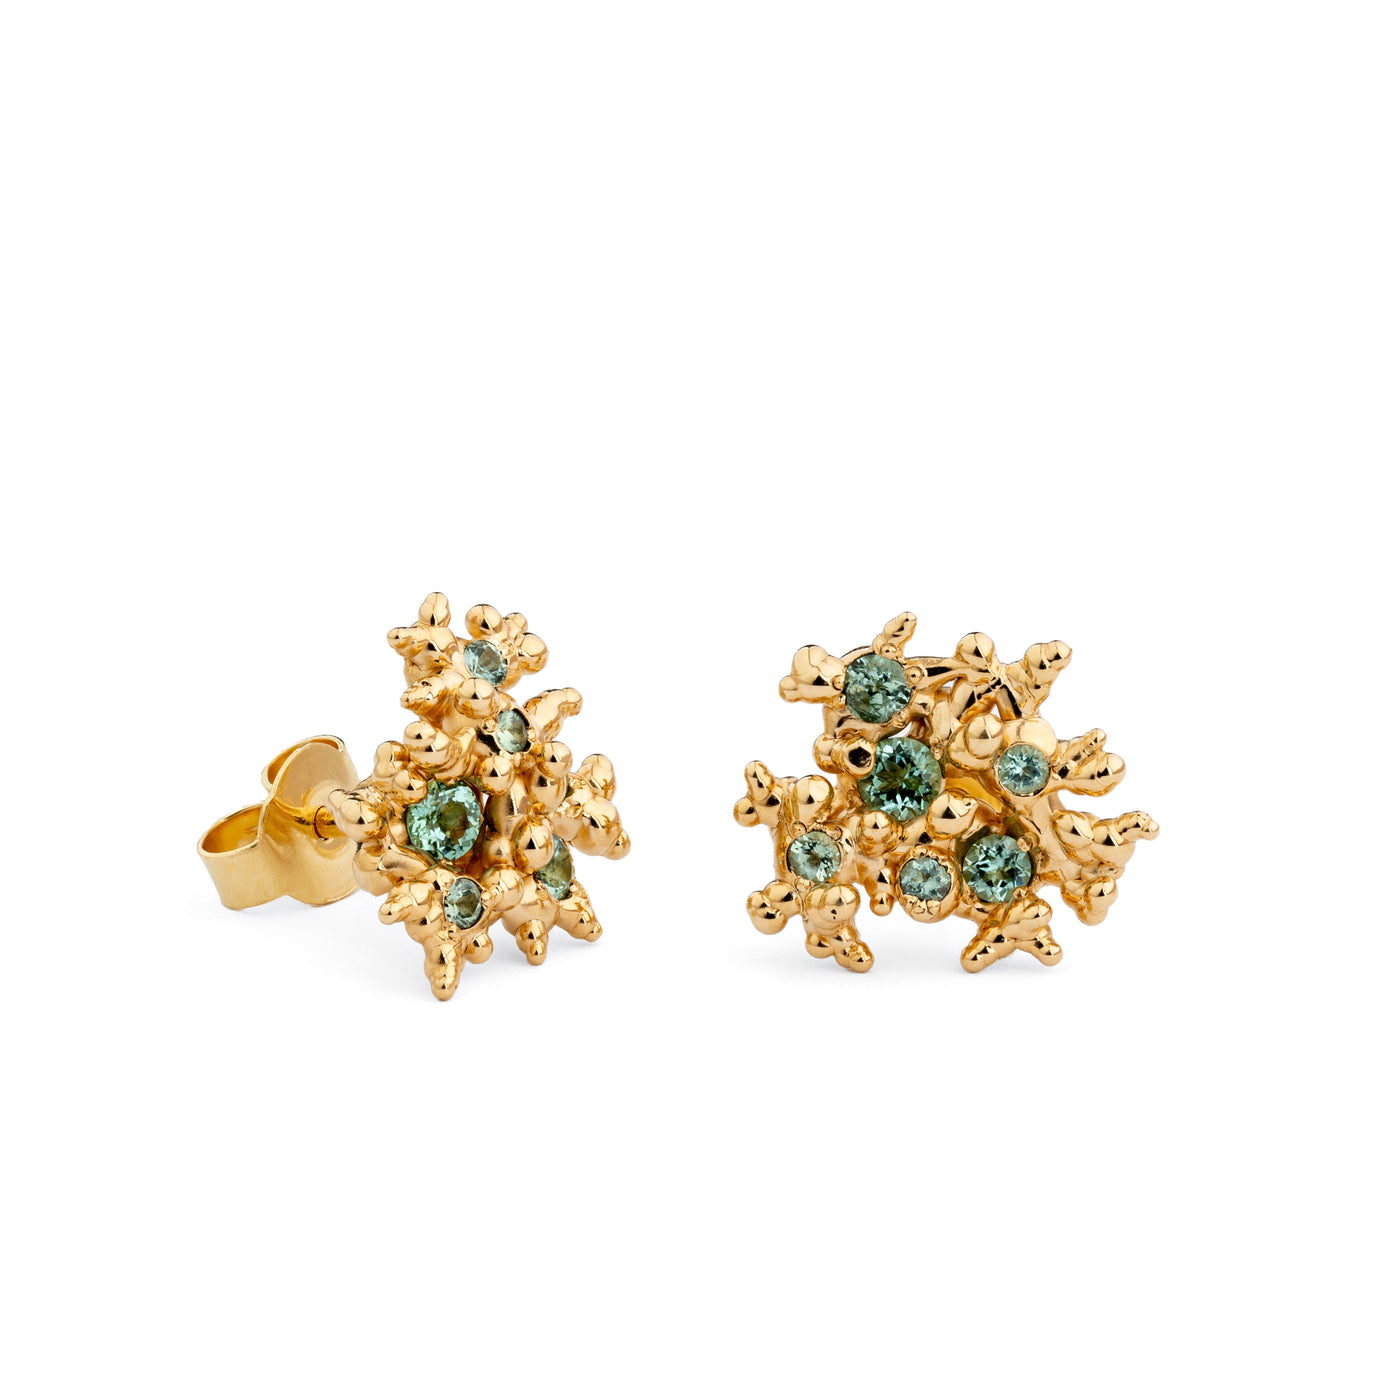 18k gold with diamonds "MINT FLOWERING"